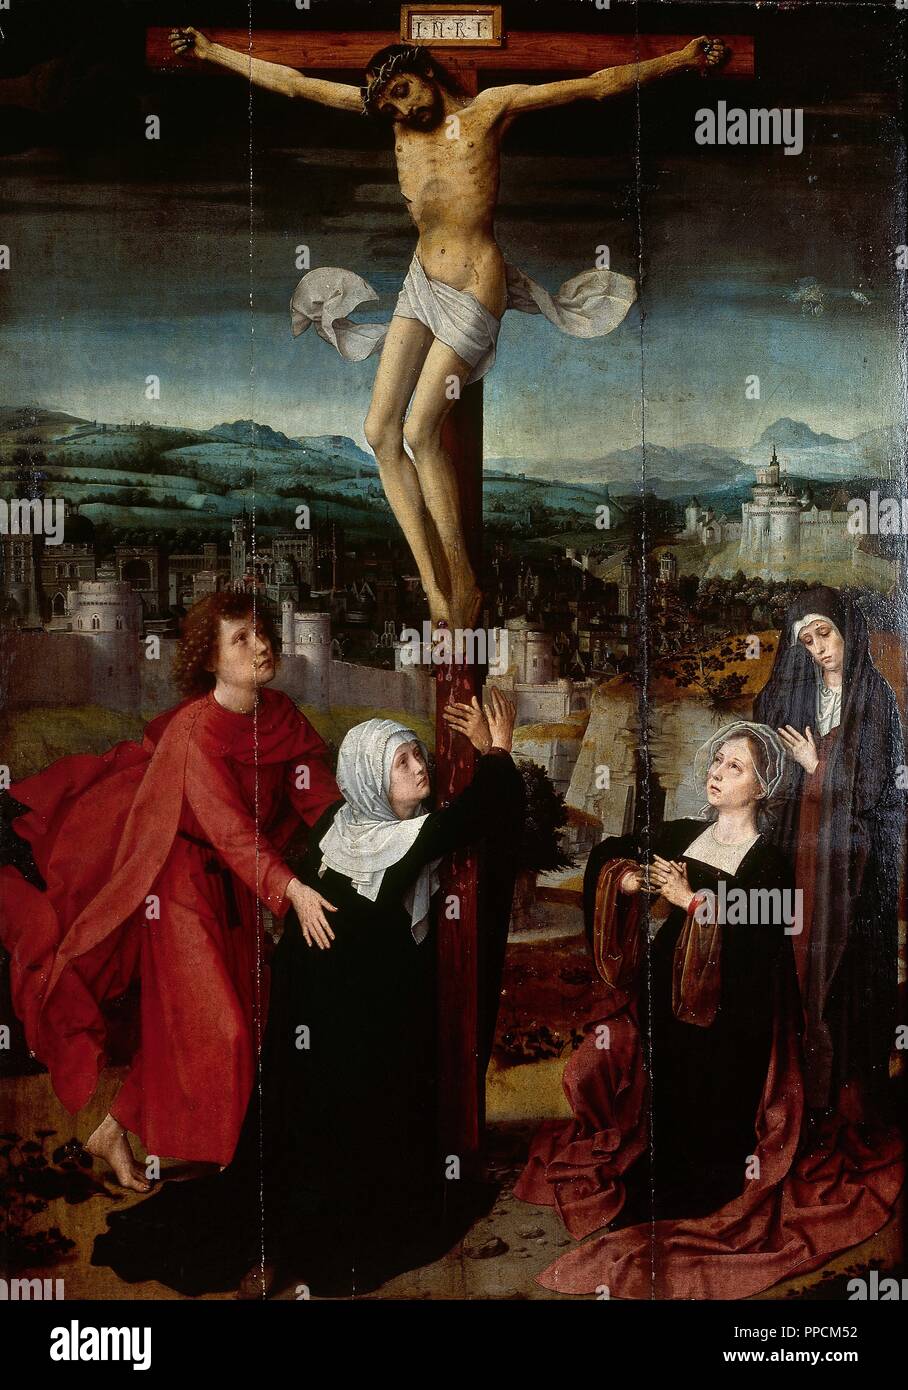 Gerard David (1460-1523). Calvary. Crucifixion with the Virgin Mary, St. John, St. Mary Magdalene and Salome. From Church of st. Mary, Cuenca. Diocesan Museum. Cuenca. Spain. Stock Photo